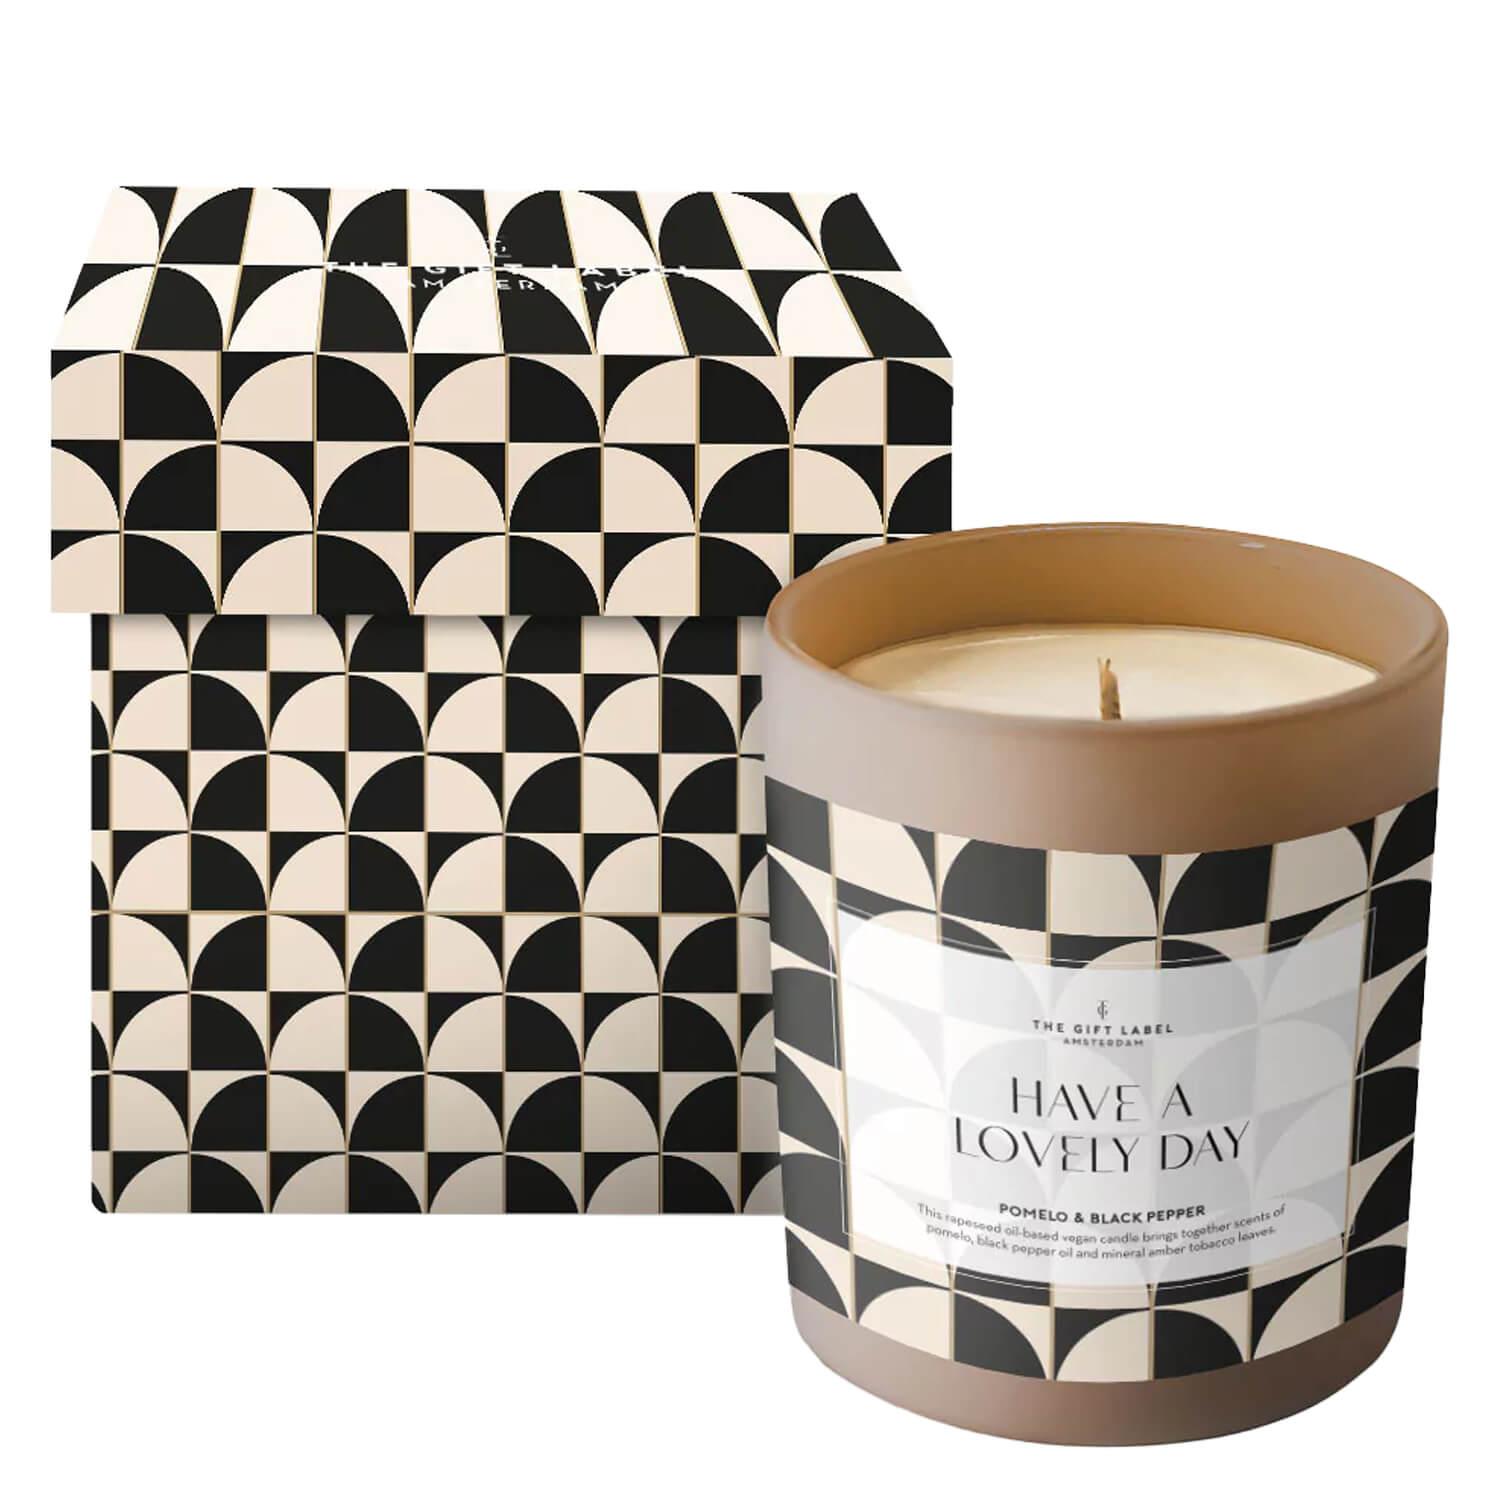 TGL Home - Candle Glass Pomelo & Black Pepper  Have A Lovely Day